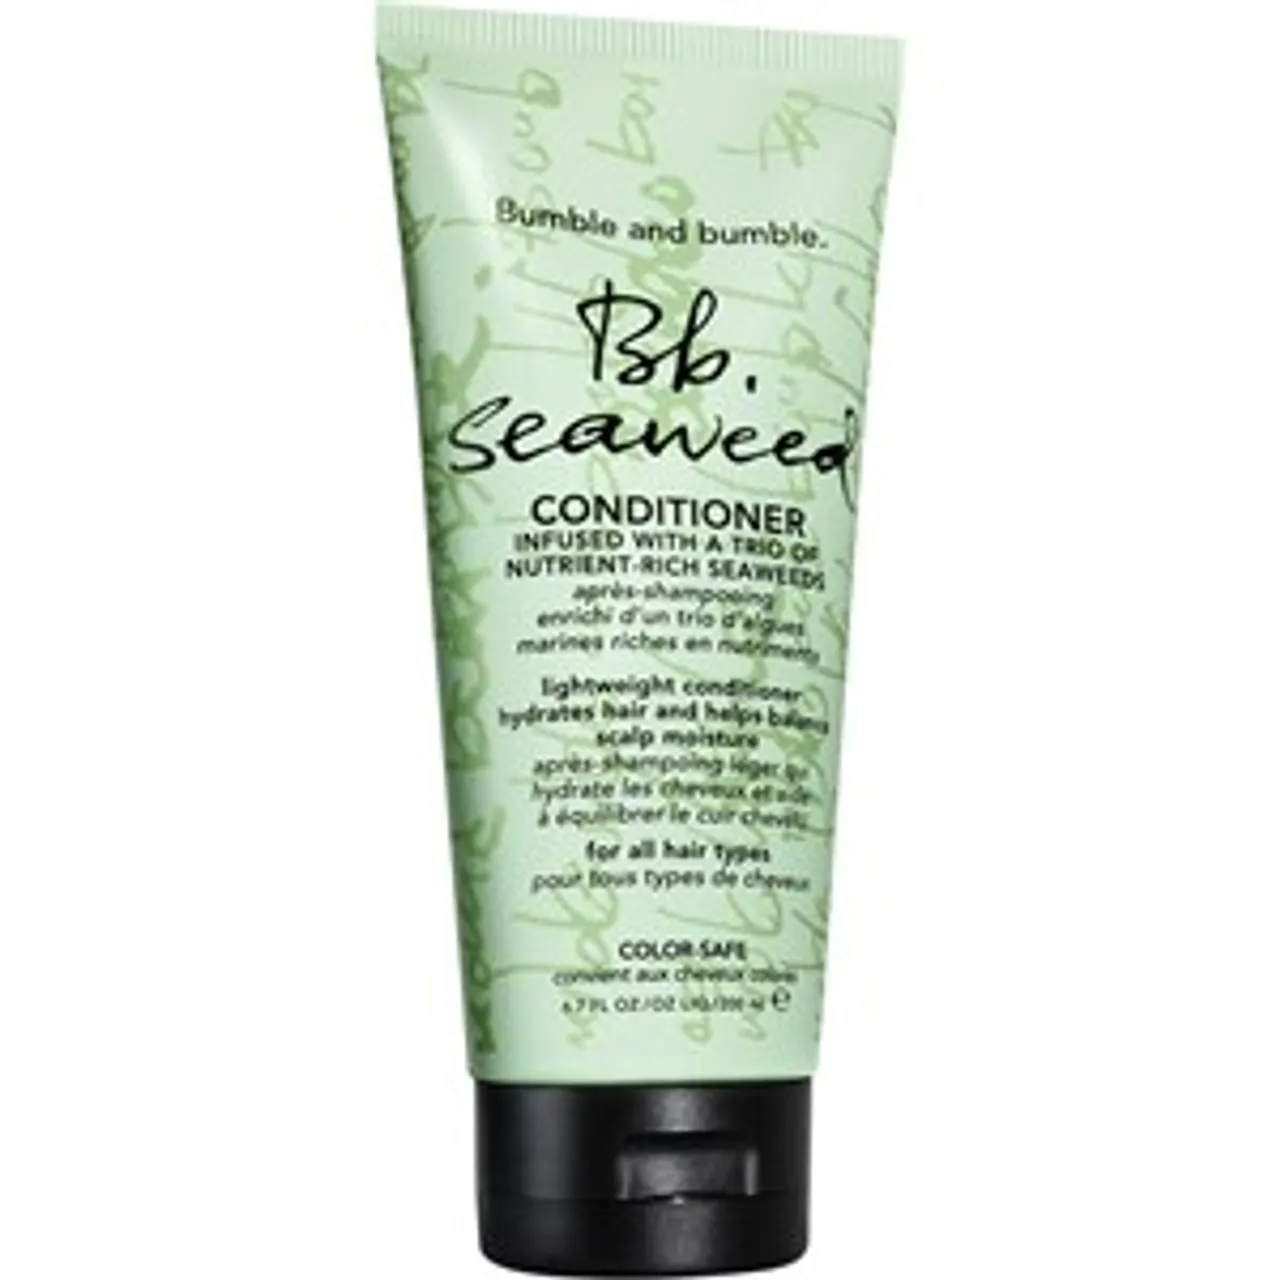 Bumble and bumble Seaweed Conditioner Female 200 ml